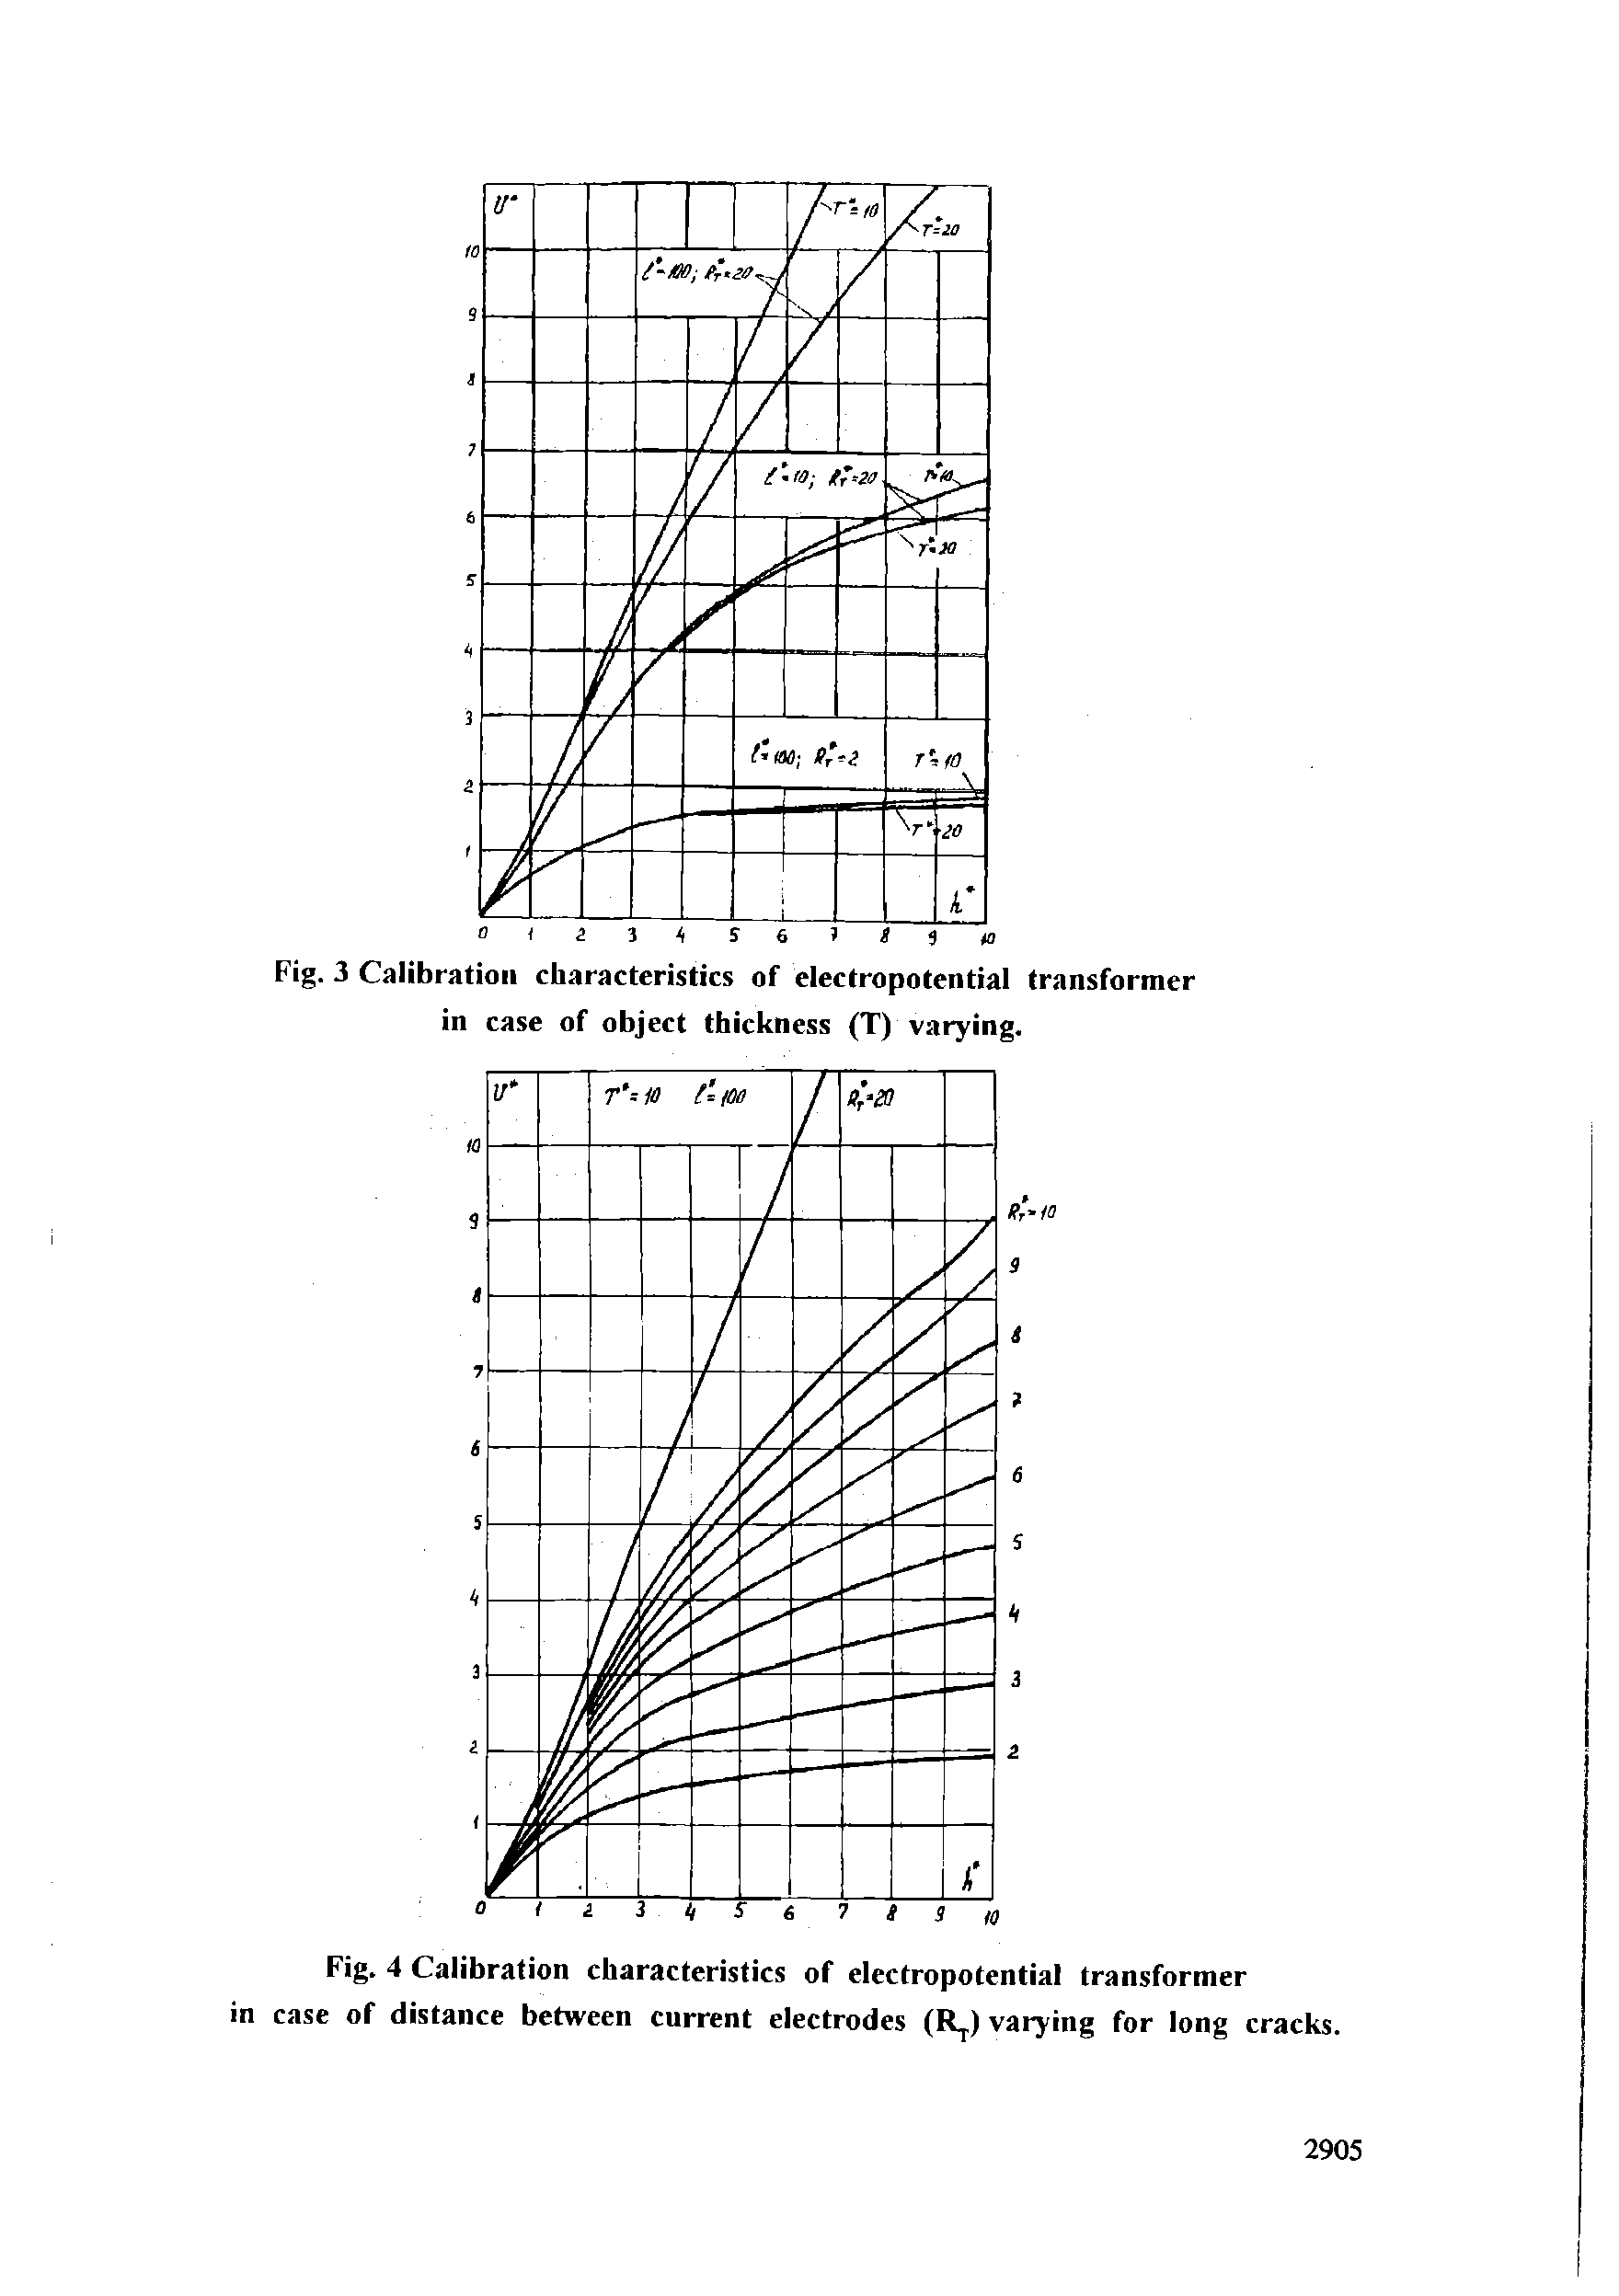 Fig. 4 Calibration characteristics of electropotential transformer in case of distance between current electrodes (R. ) varying for long cracks.